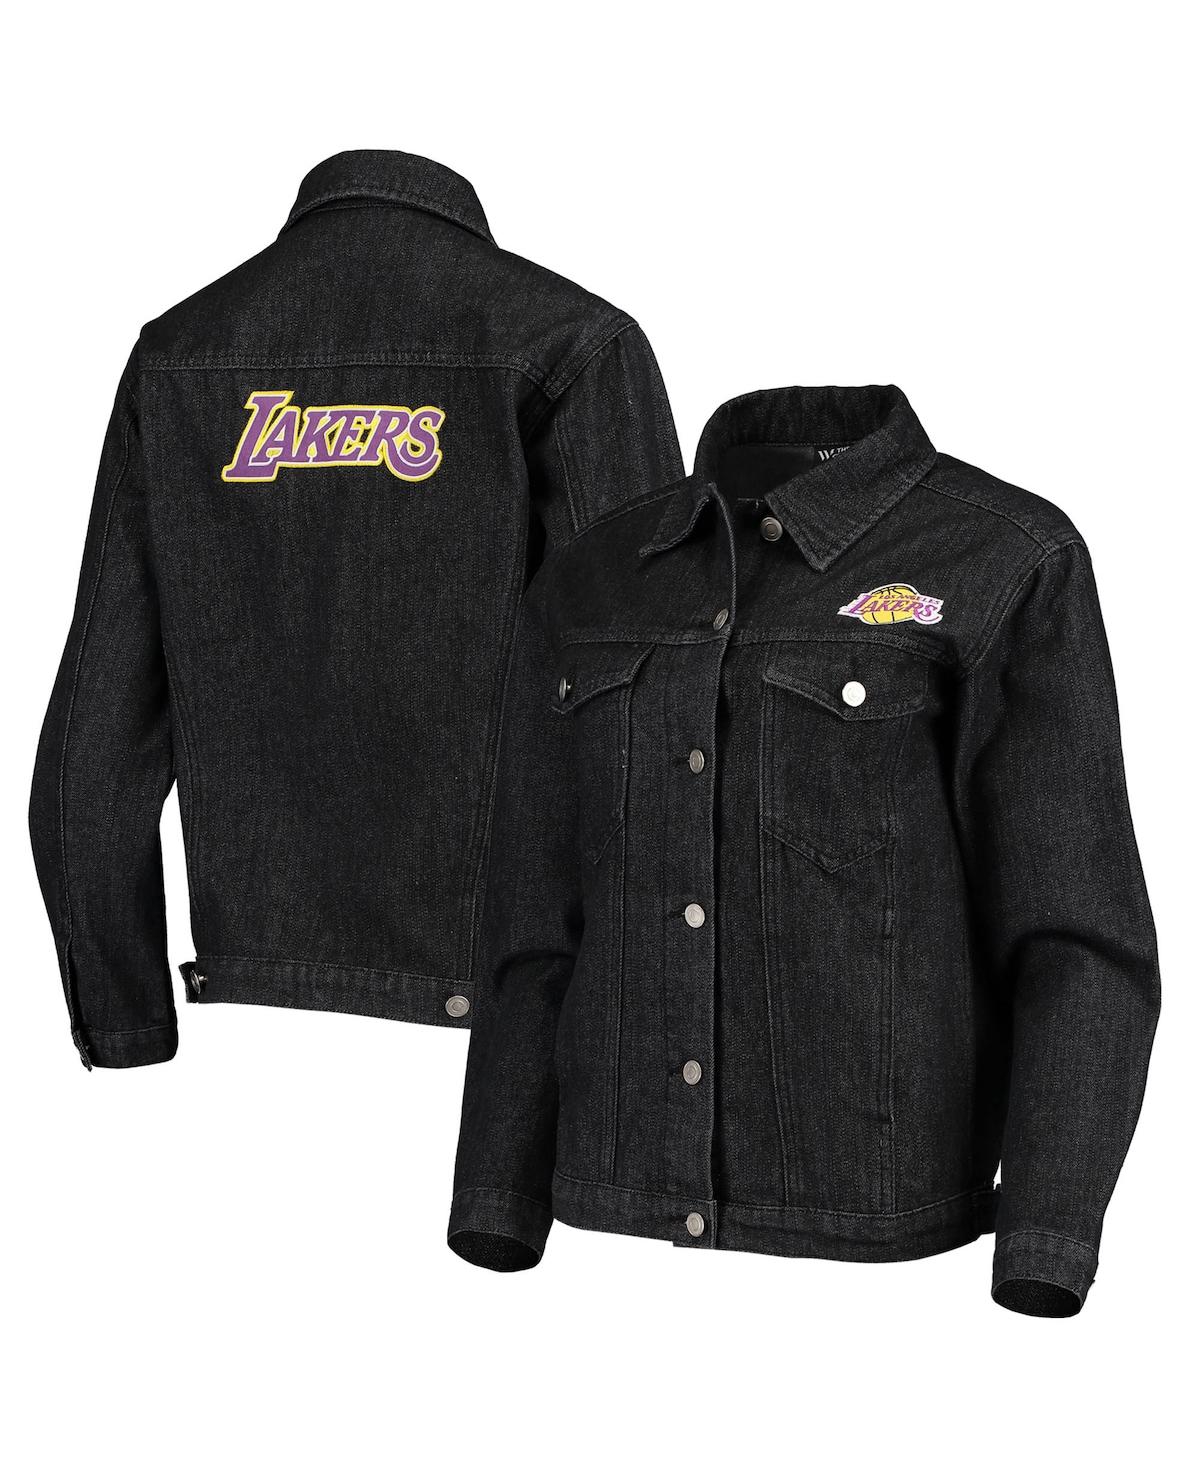 Women's The Wild Collective Black Los Angeles Lakers Patch Denim Button-Up Jacket - Black